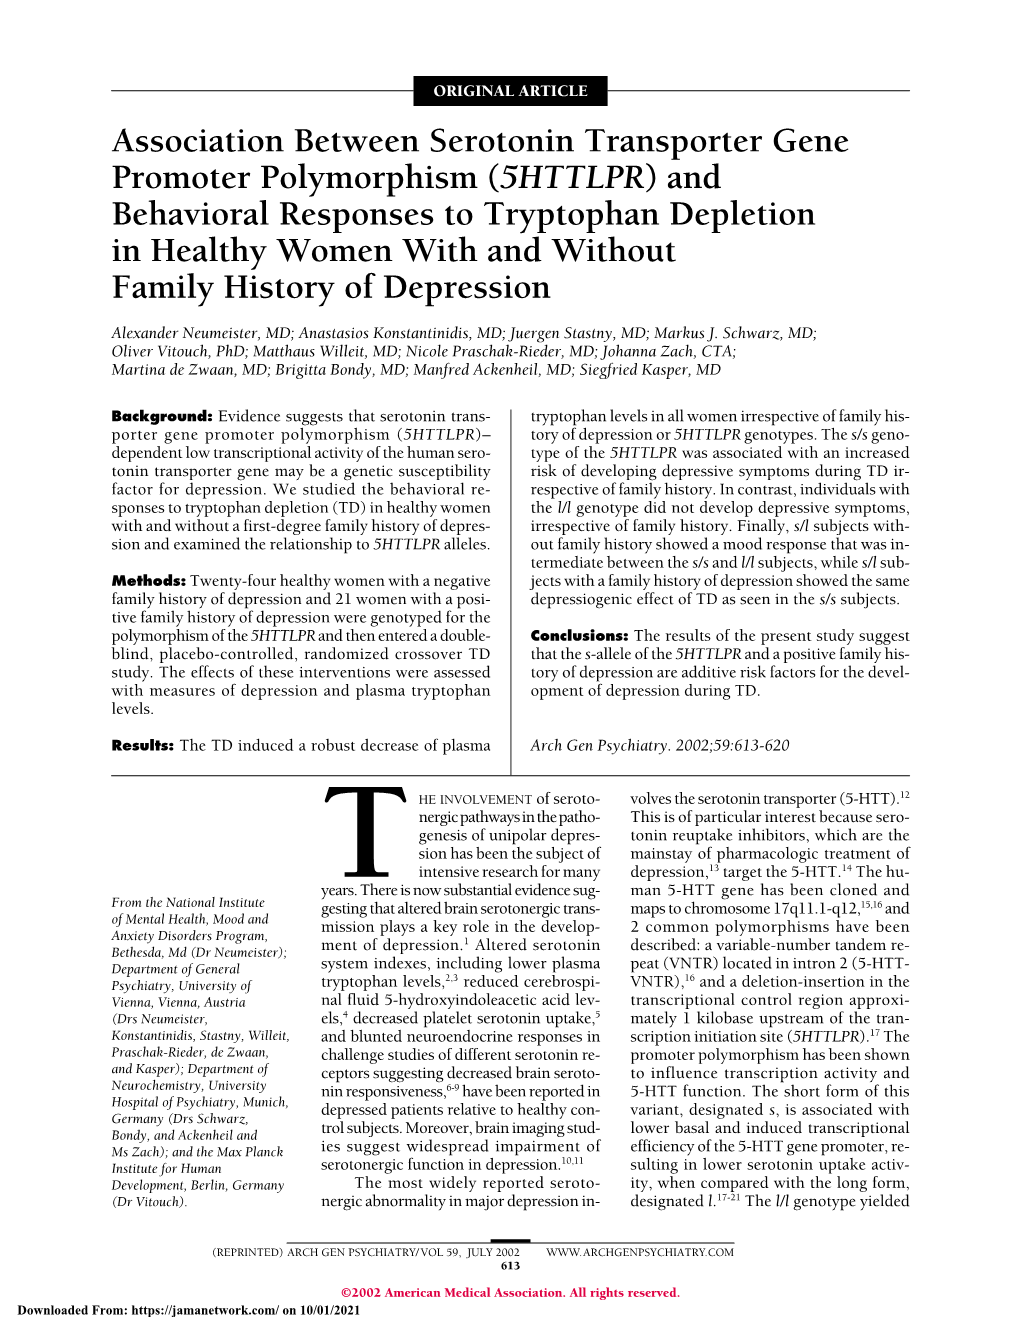 Association Between Serotonin Transporter Gene Promoter Polymorphism (5HTTLPR) and Behavioral Responses to Tryptophan Depletion in Healthy Women with and Without Family